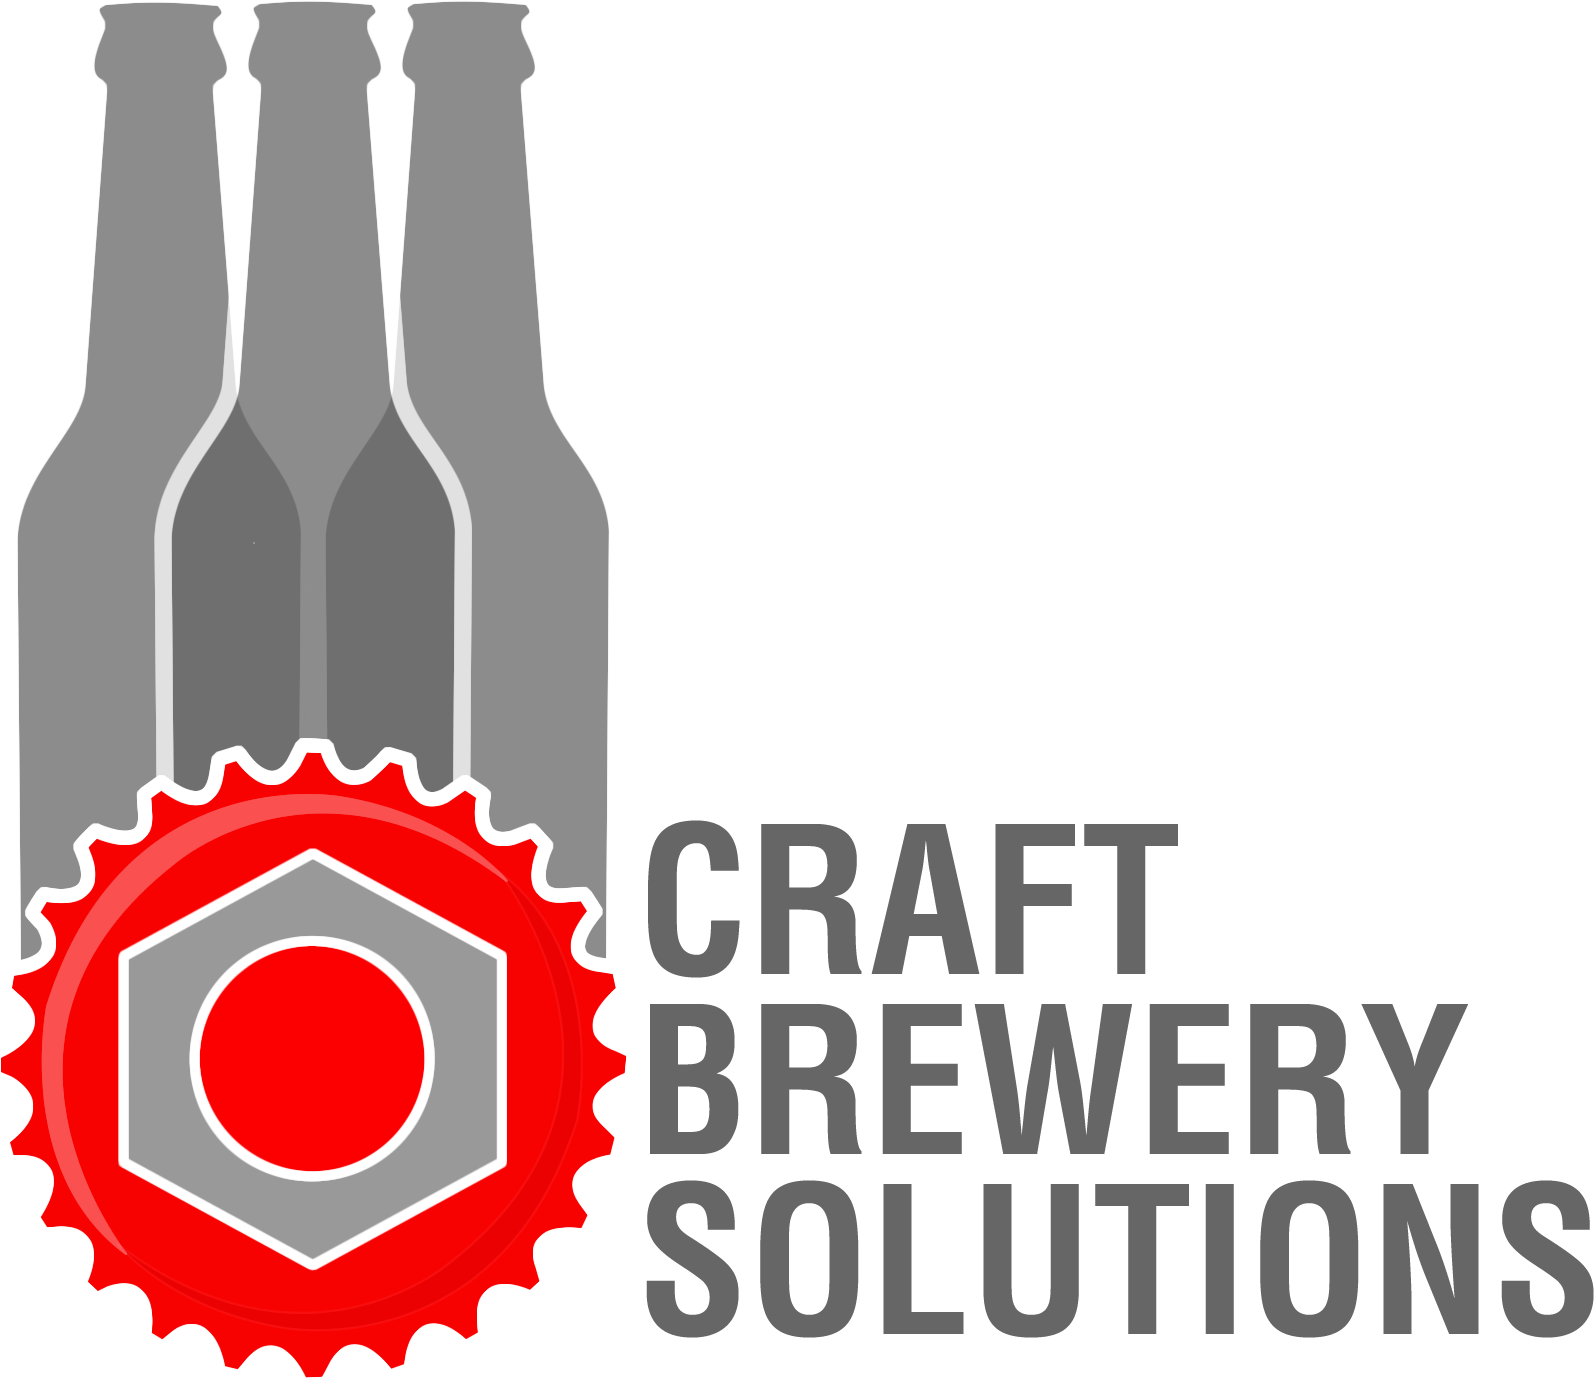 Craft Brewery Solutions jobs